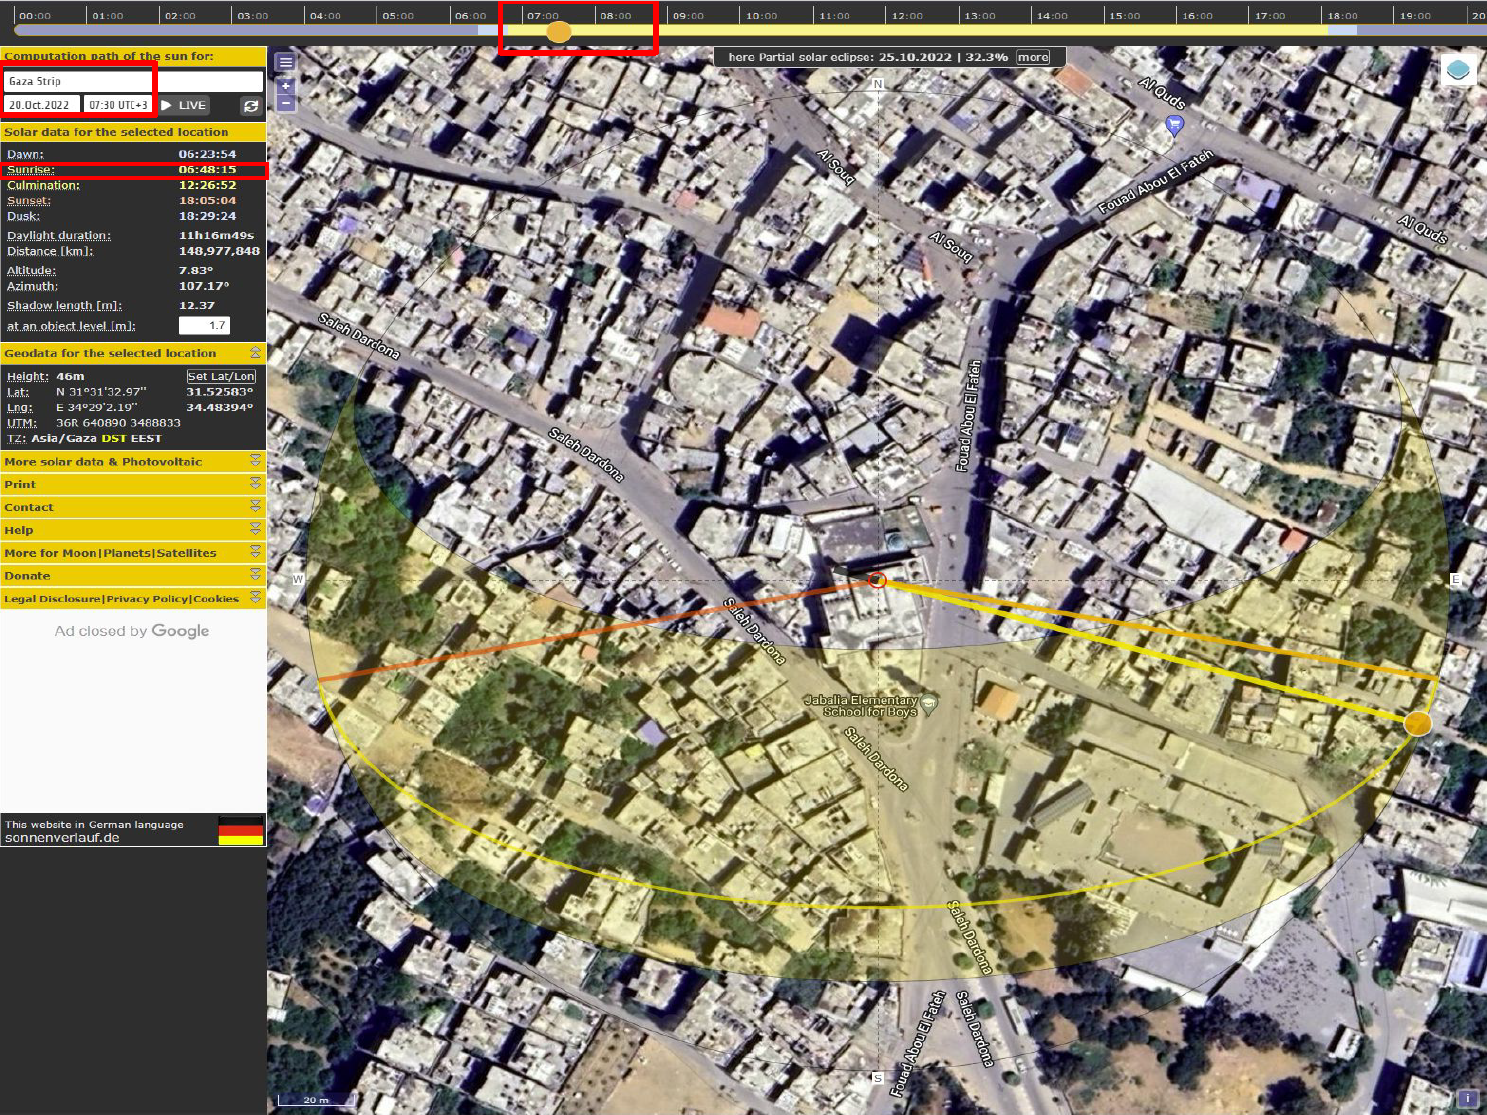 An image from SunCalc showing the position and path of the sun at the mosque site on the date of the attack around the Al Omari mosque.